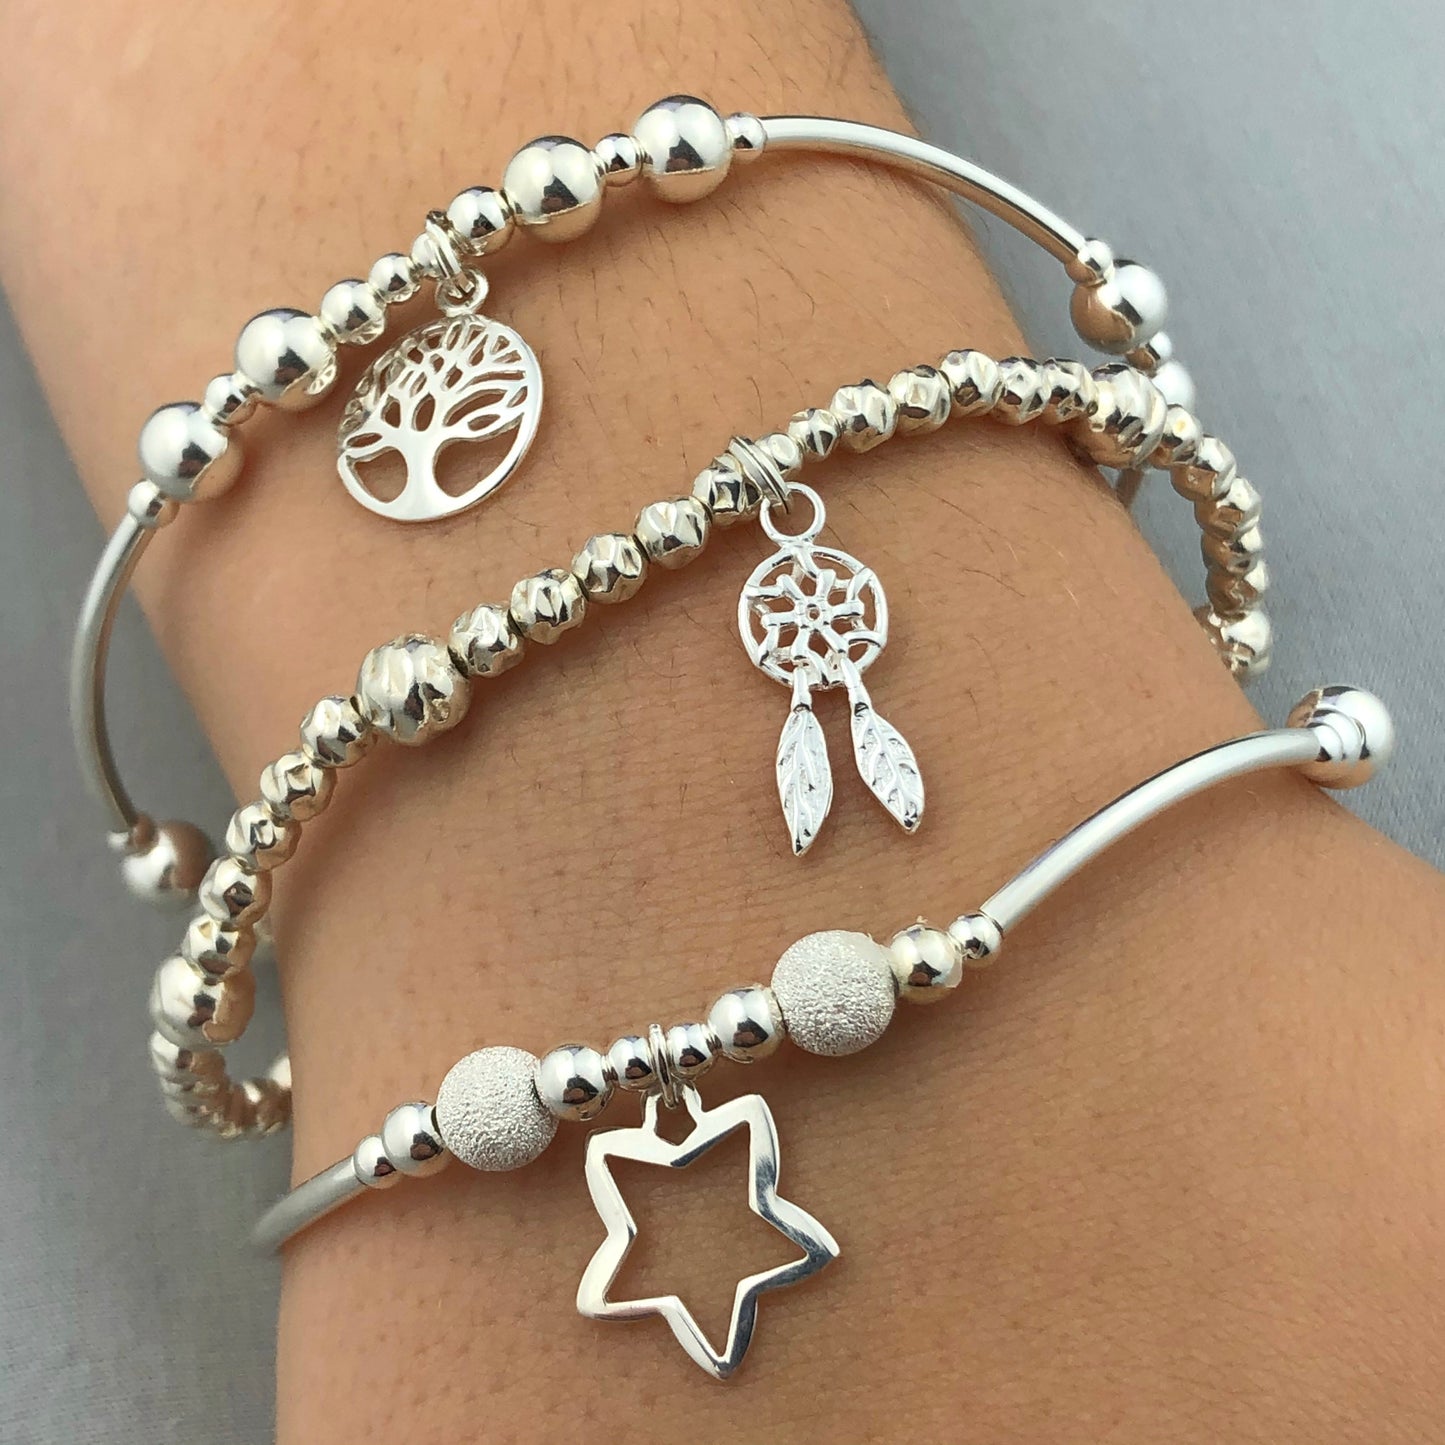 "Dreams Come True" Women's Sterling Silver Stacking Charm Bracelet Set by My Silver Wish